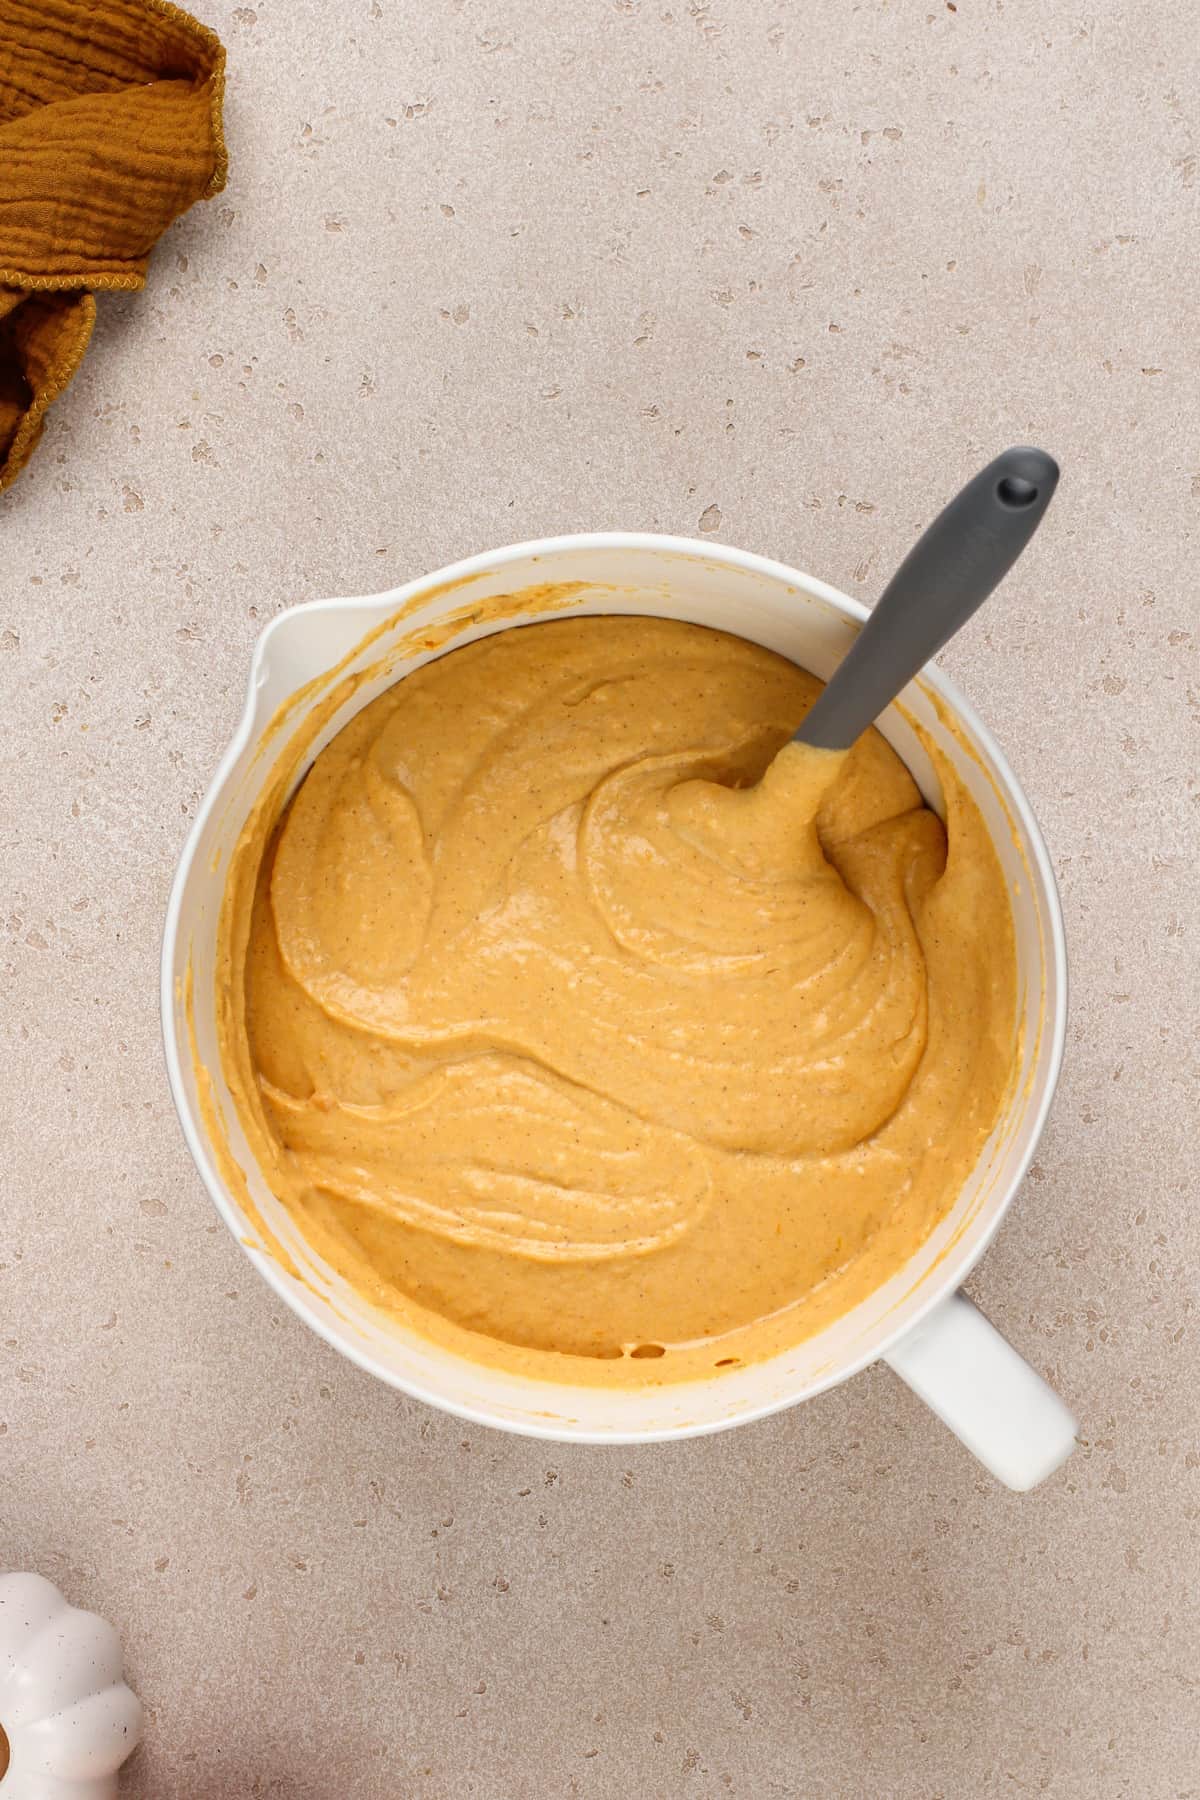 Sweet potato cheesecake filling in a white mixing bowl.